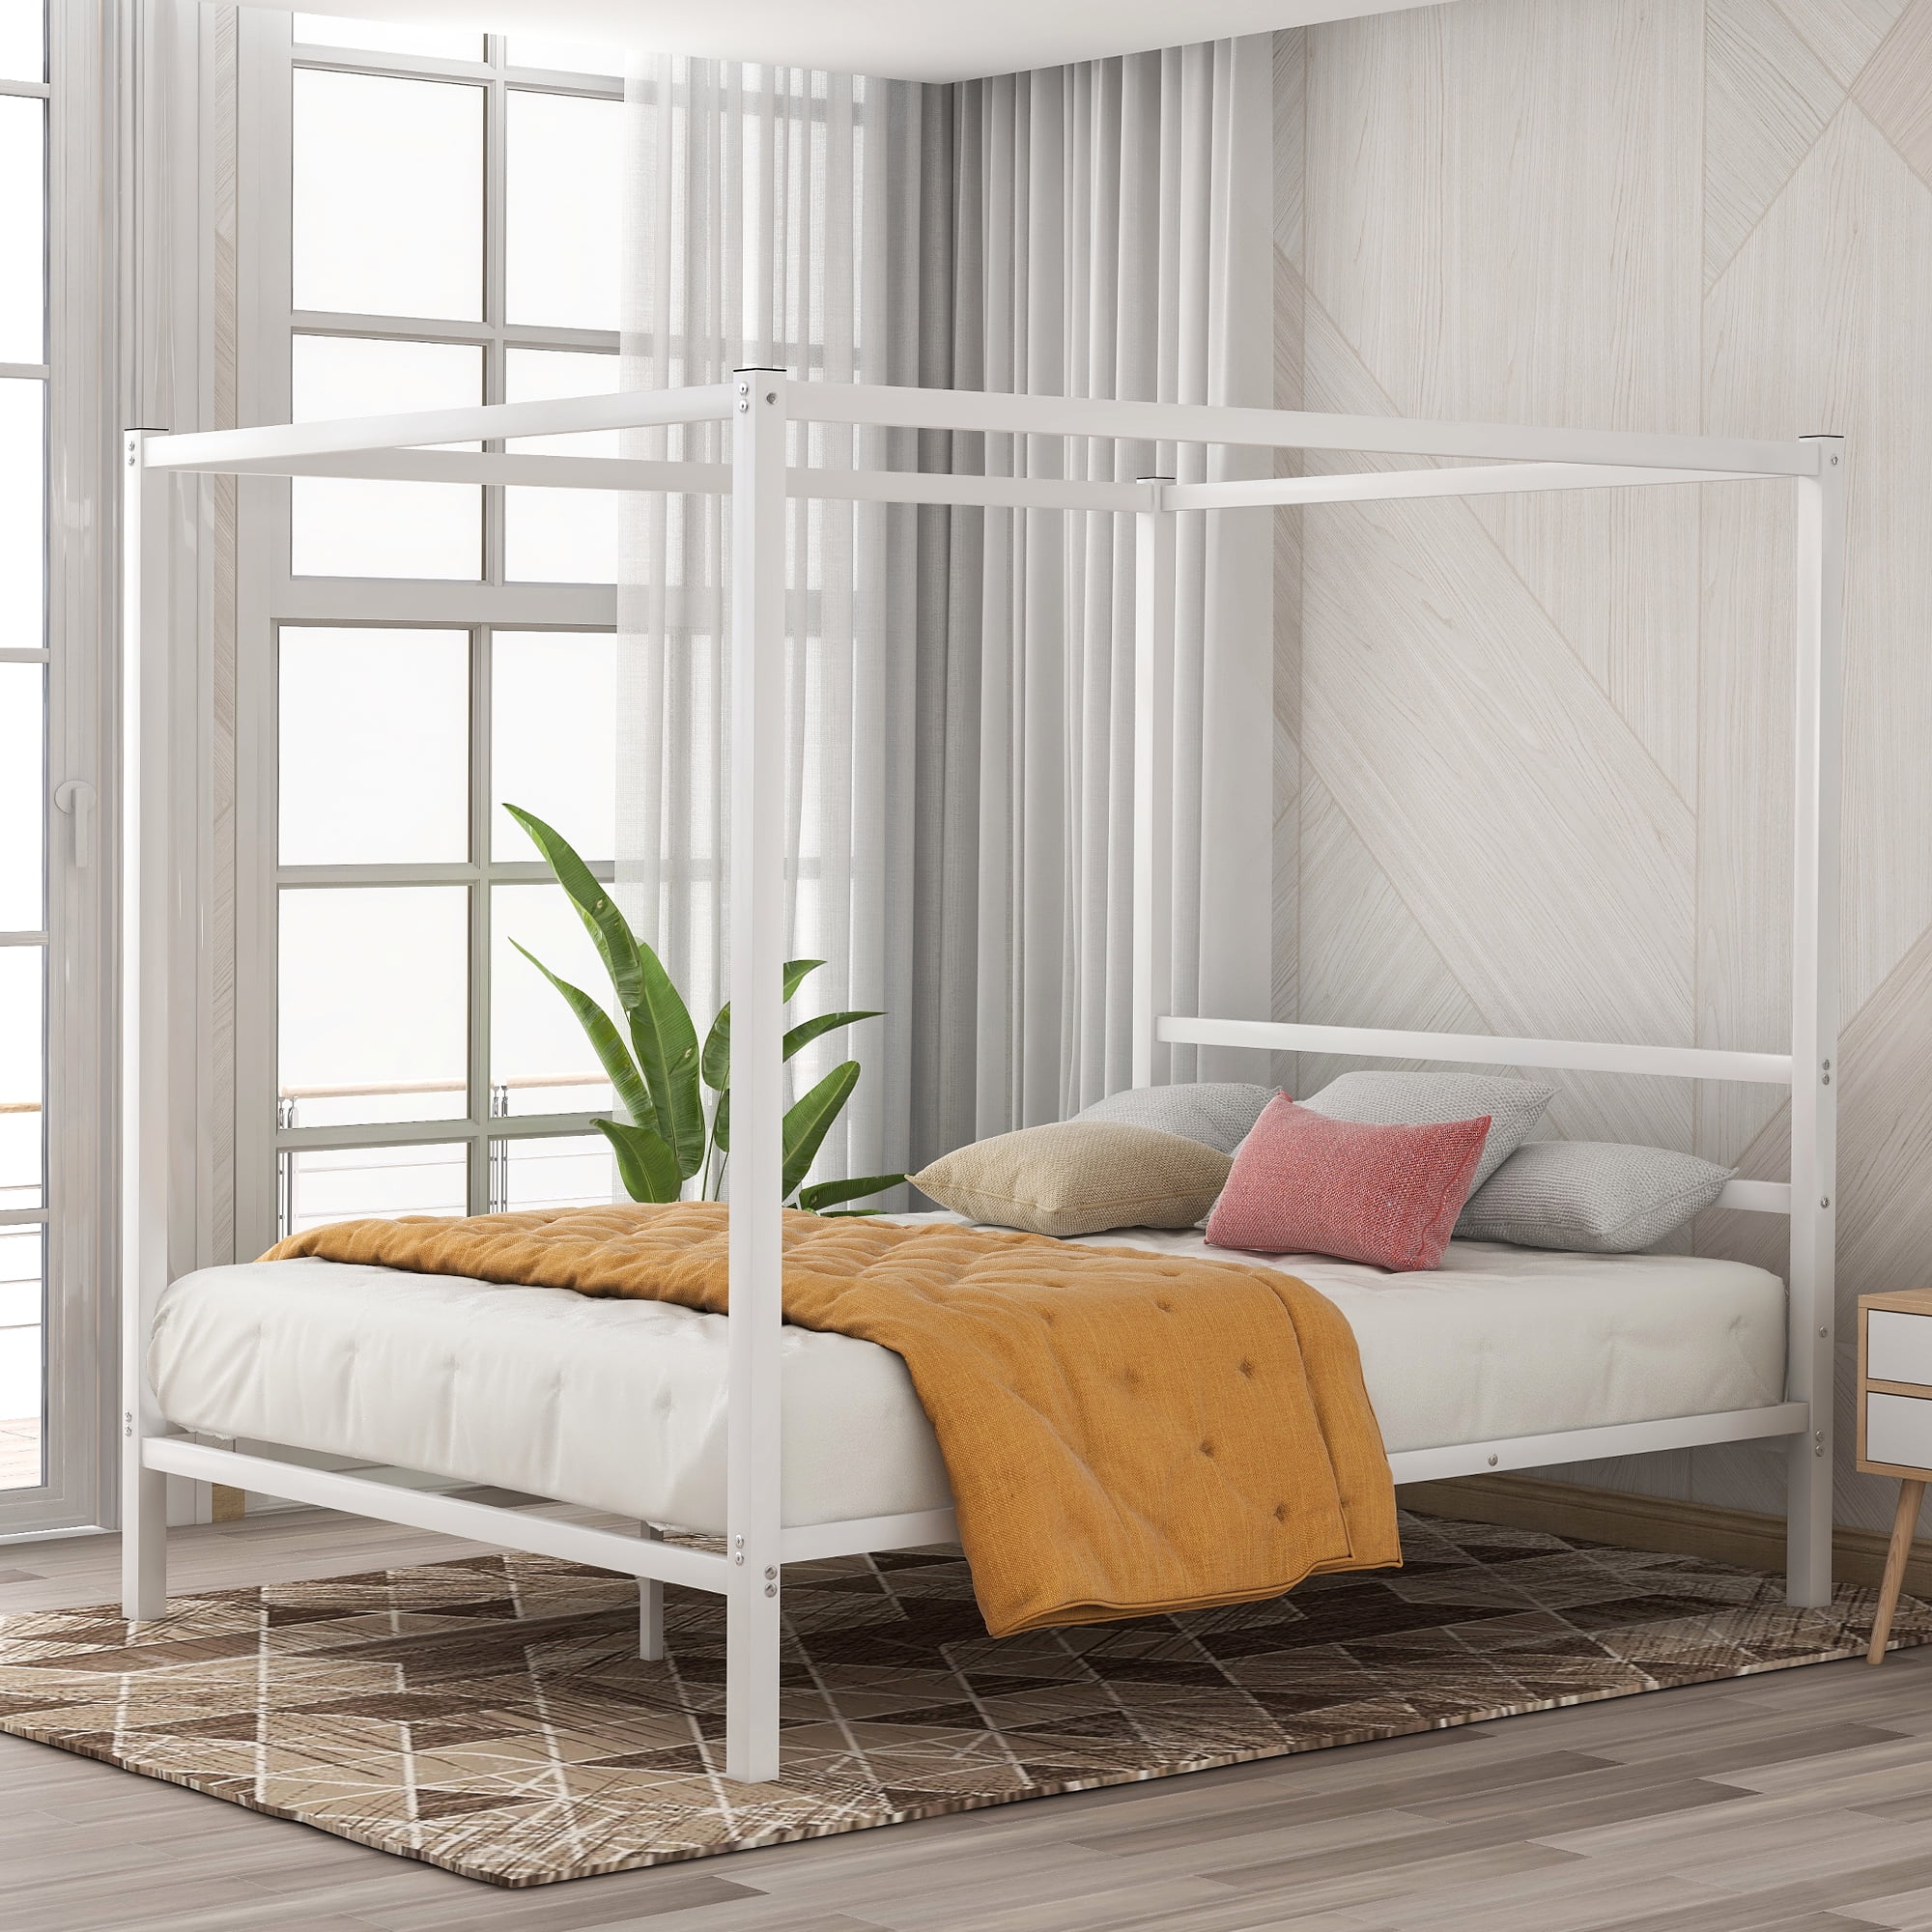 Mindful Living High Quality Wooden Twin Sized House Bed Frame and Canopy White for sale online